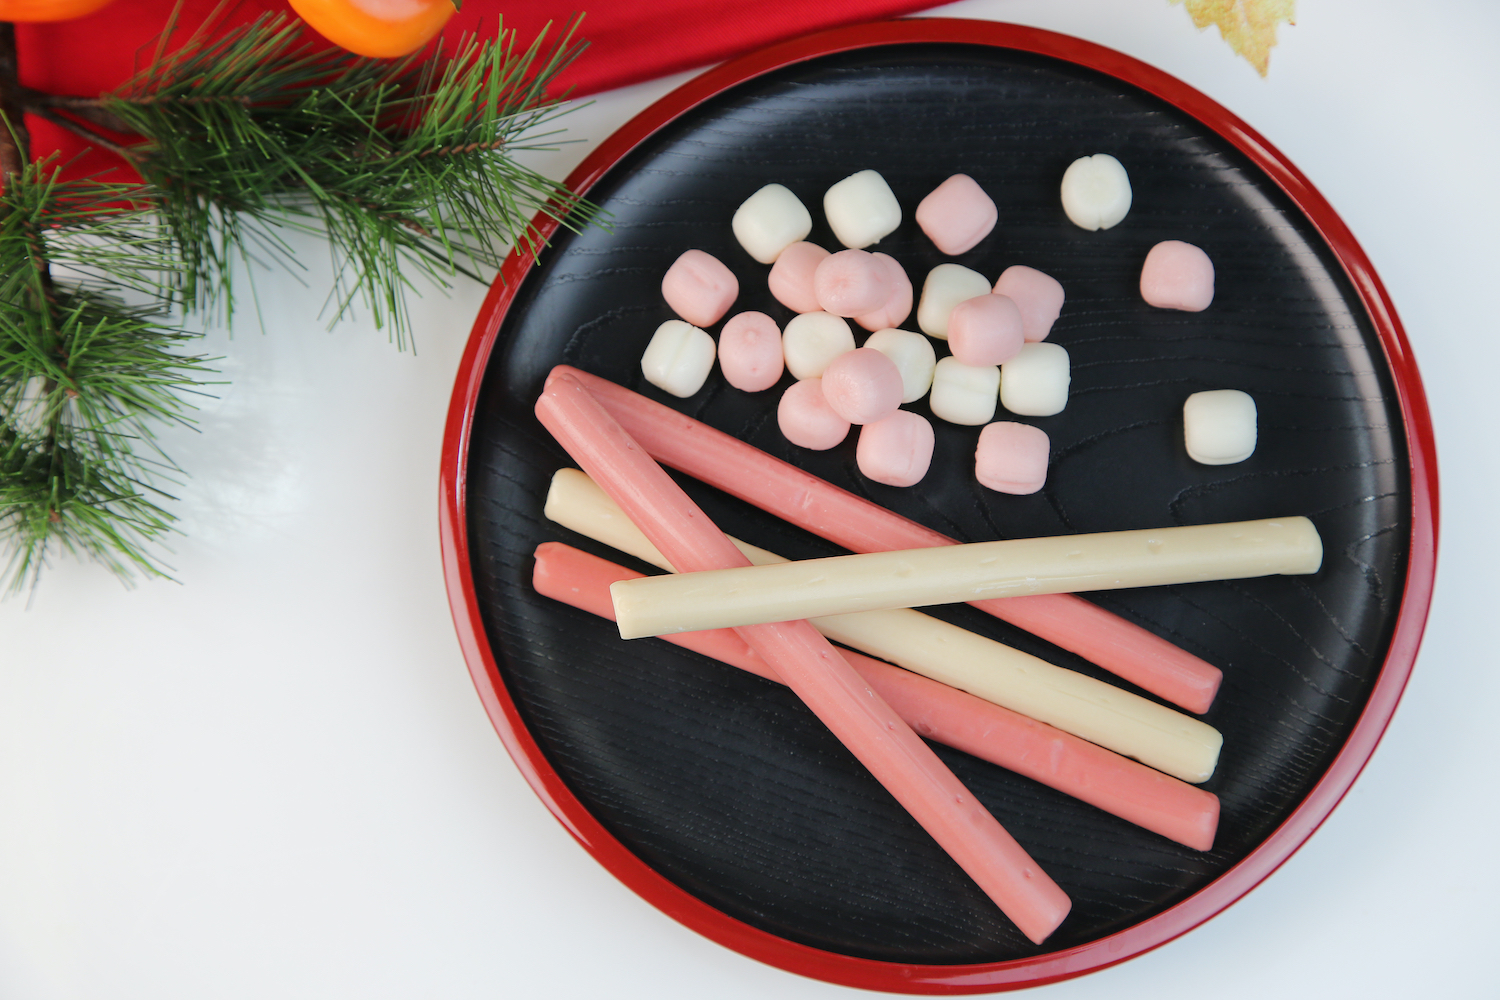 Chitoseame /a long stick of red and white candy sold at children's festivals